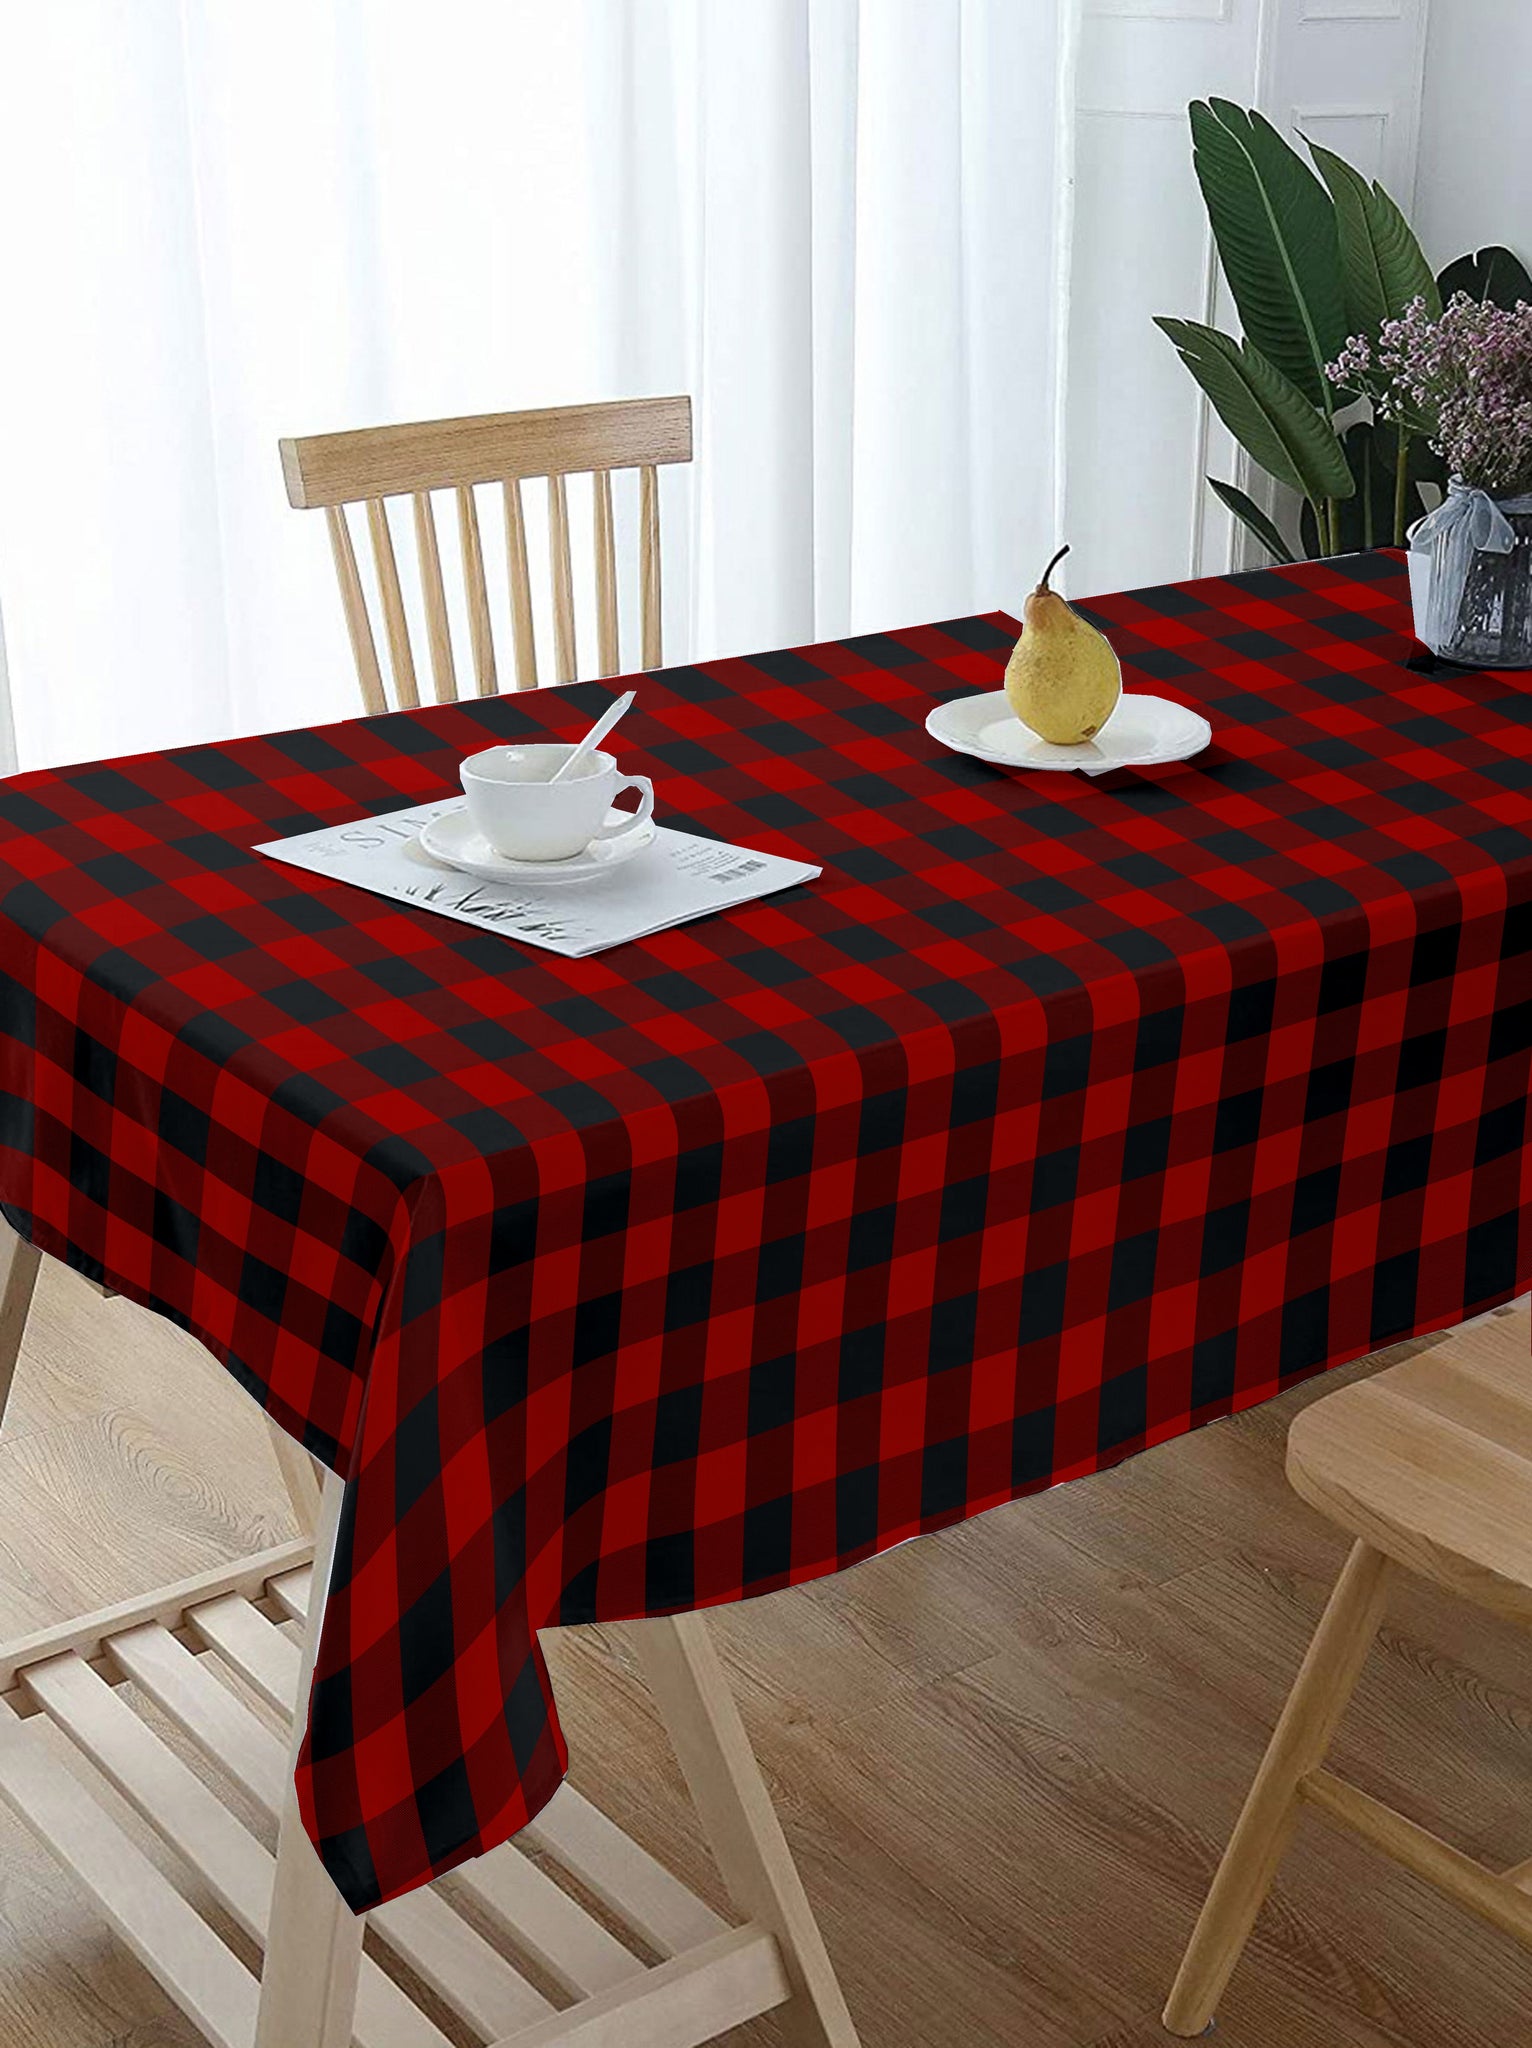 Lushomes table cover, Buffalo Checks Red & Black Plaid Dining Table Cover Cloth, home decor items, checked table cloth, centre table cover (Size 36 x 60 Inches , Center Table Cloth)